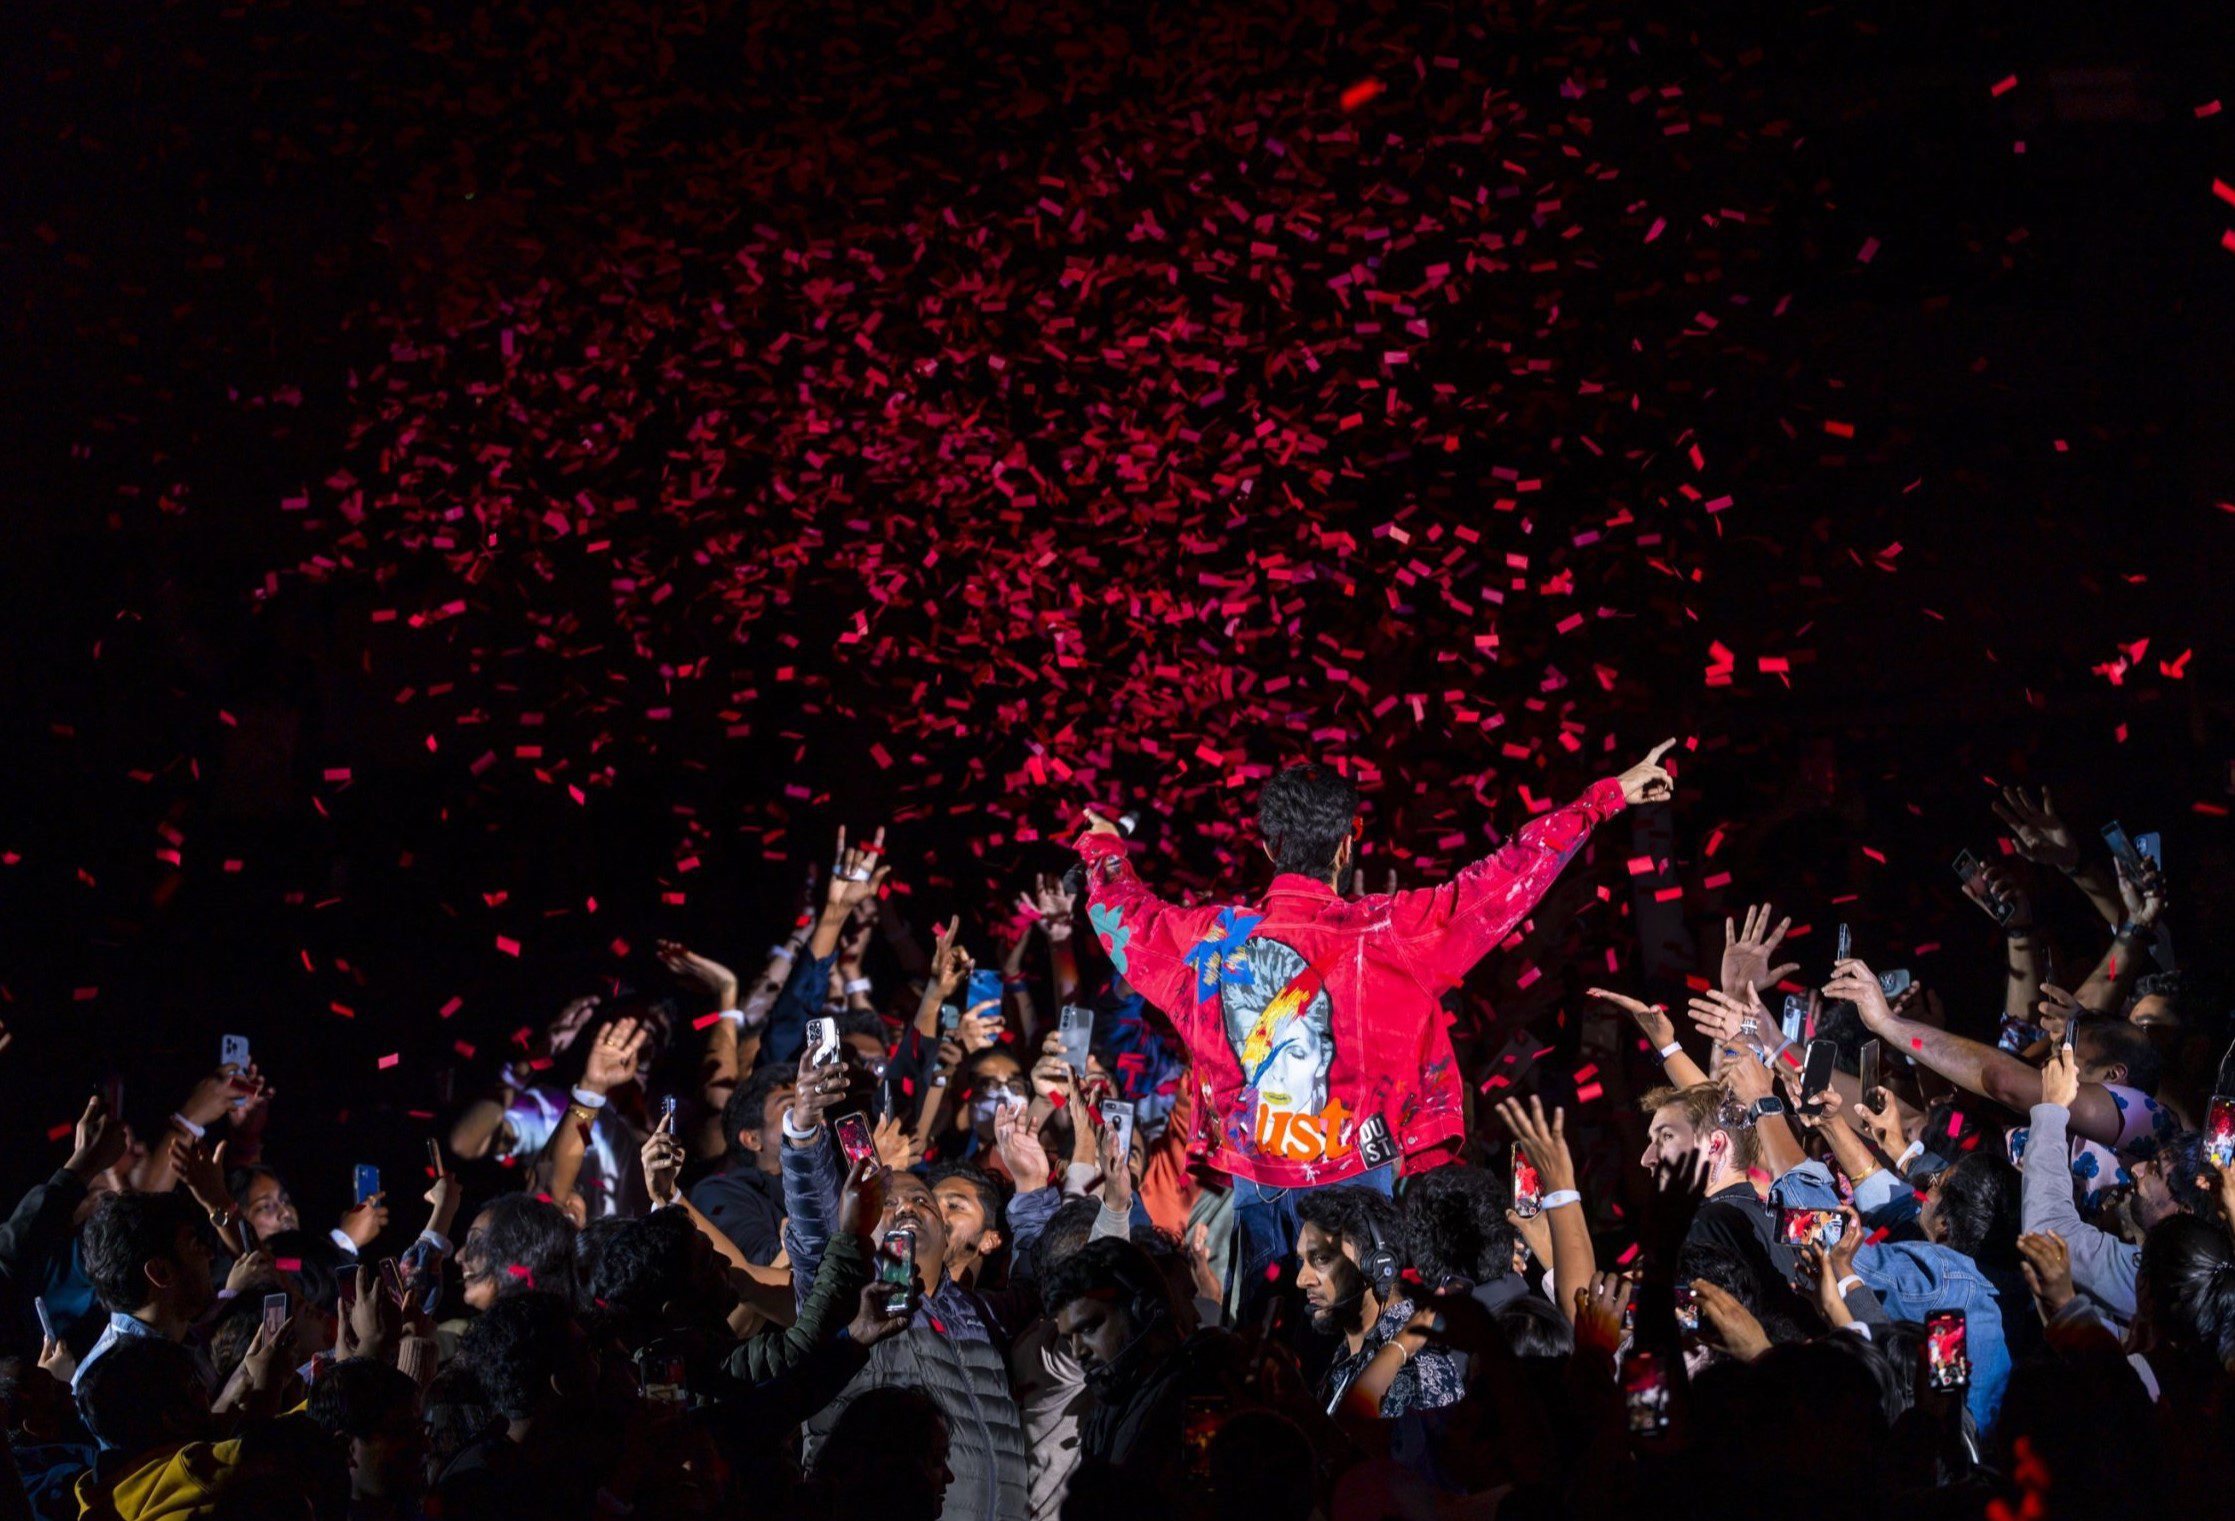 Anirudh Once upon a time north american tour